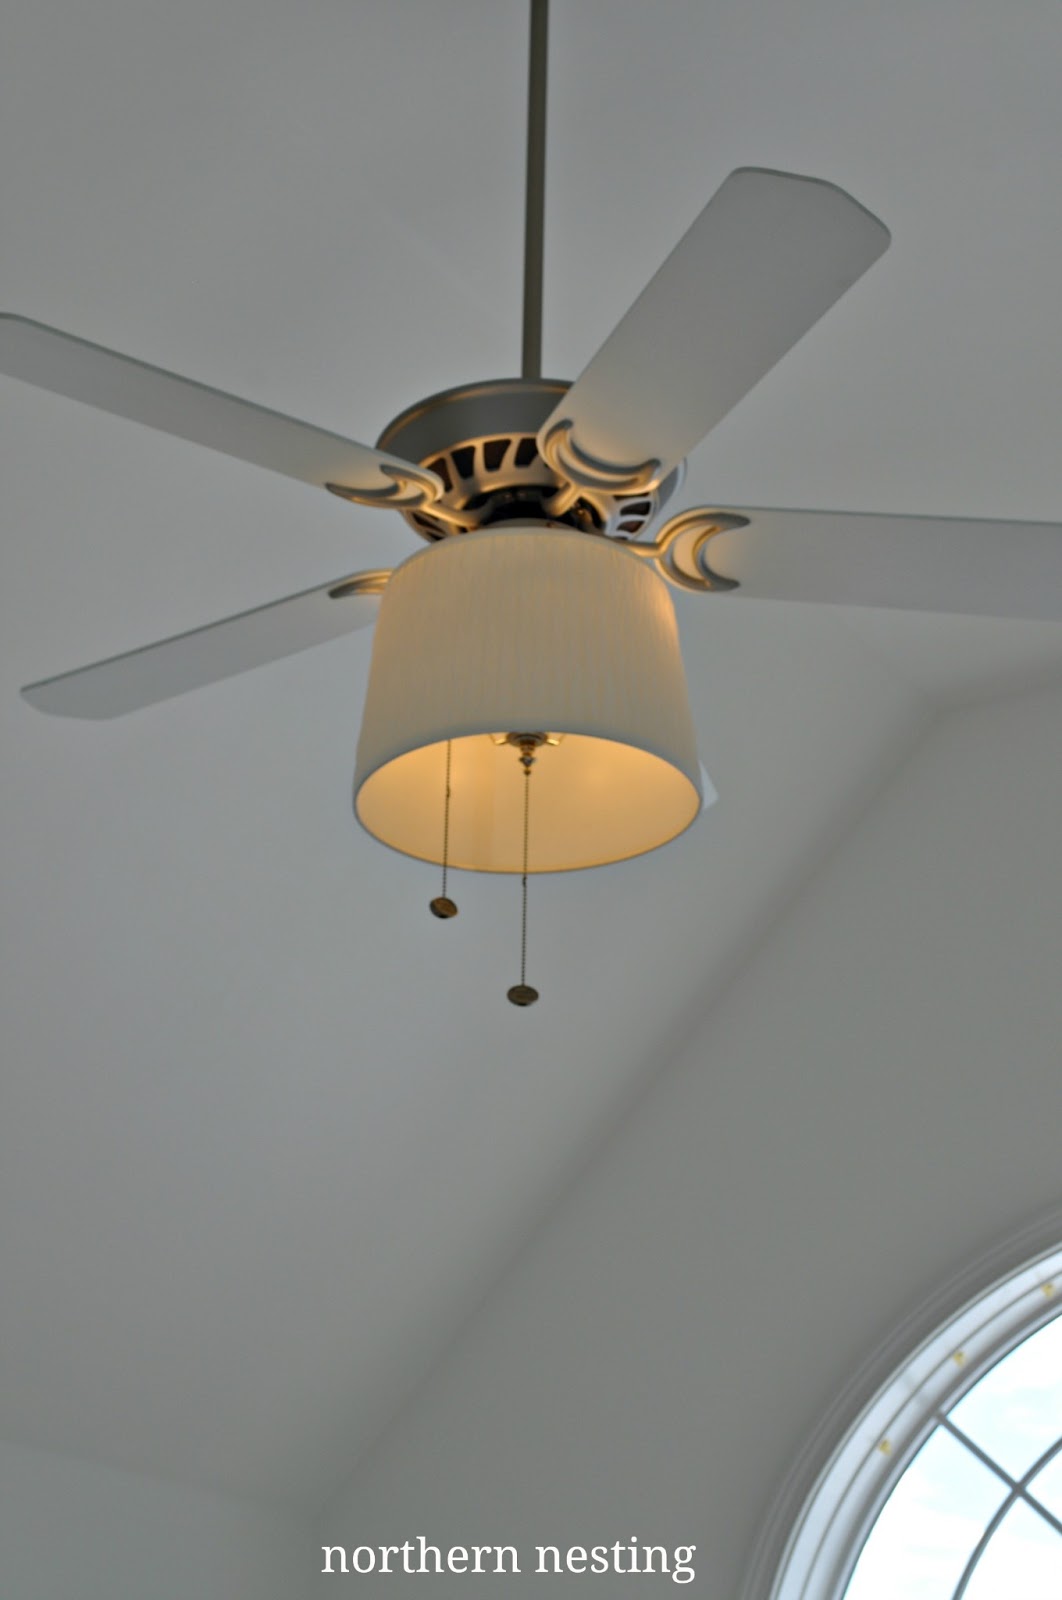 Northern Nesting Adding A Shade To Your Ceiling Fan Adding A